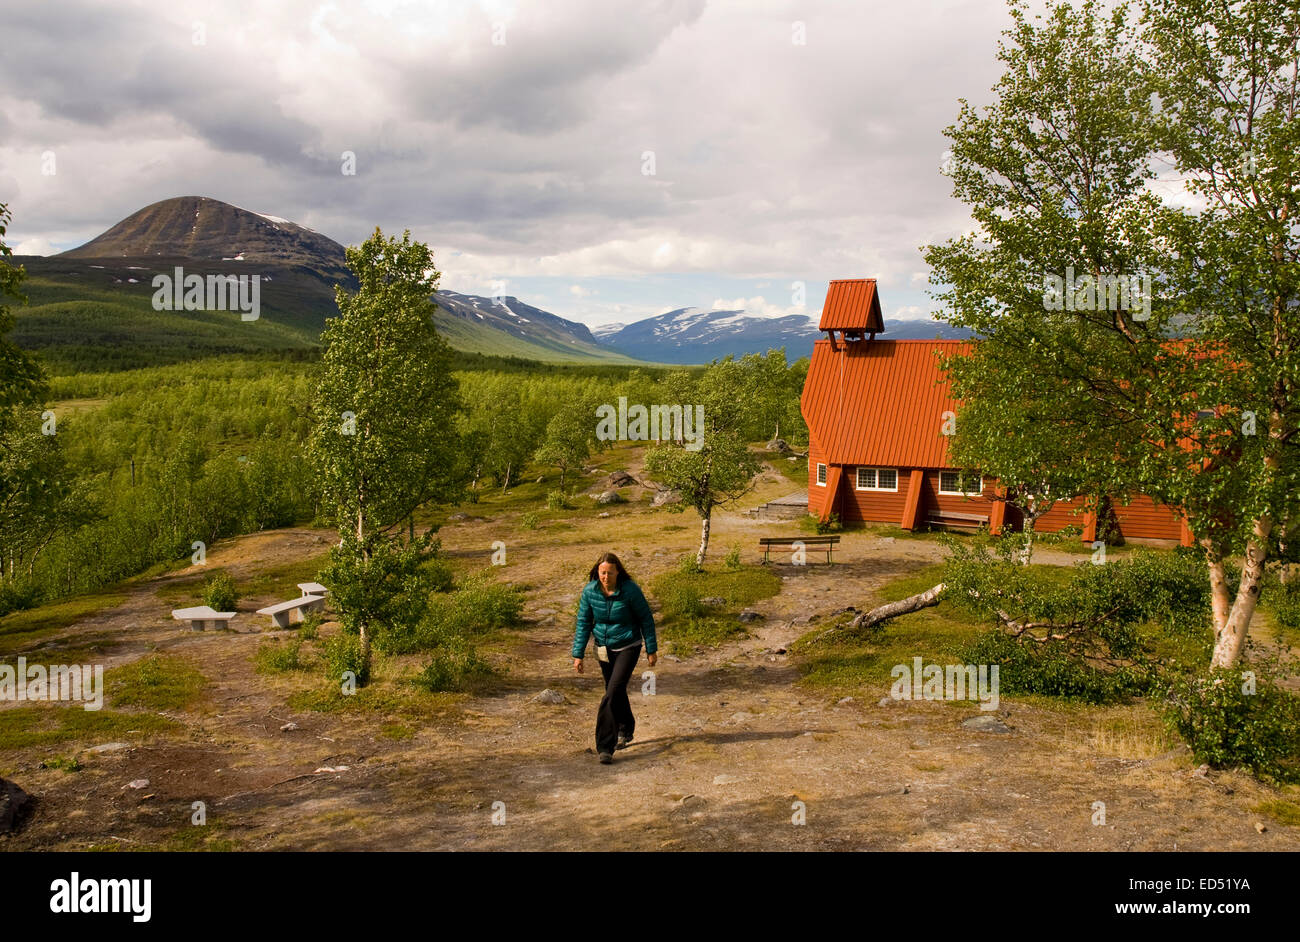 A church on the Northern section of the Kungsleden walking trail, at Nikkaluokta in Northern Sweden near Kebnekaise Fjallstation Stock Photo